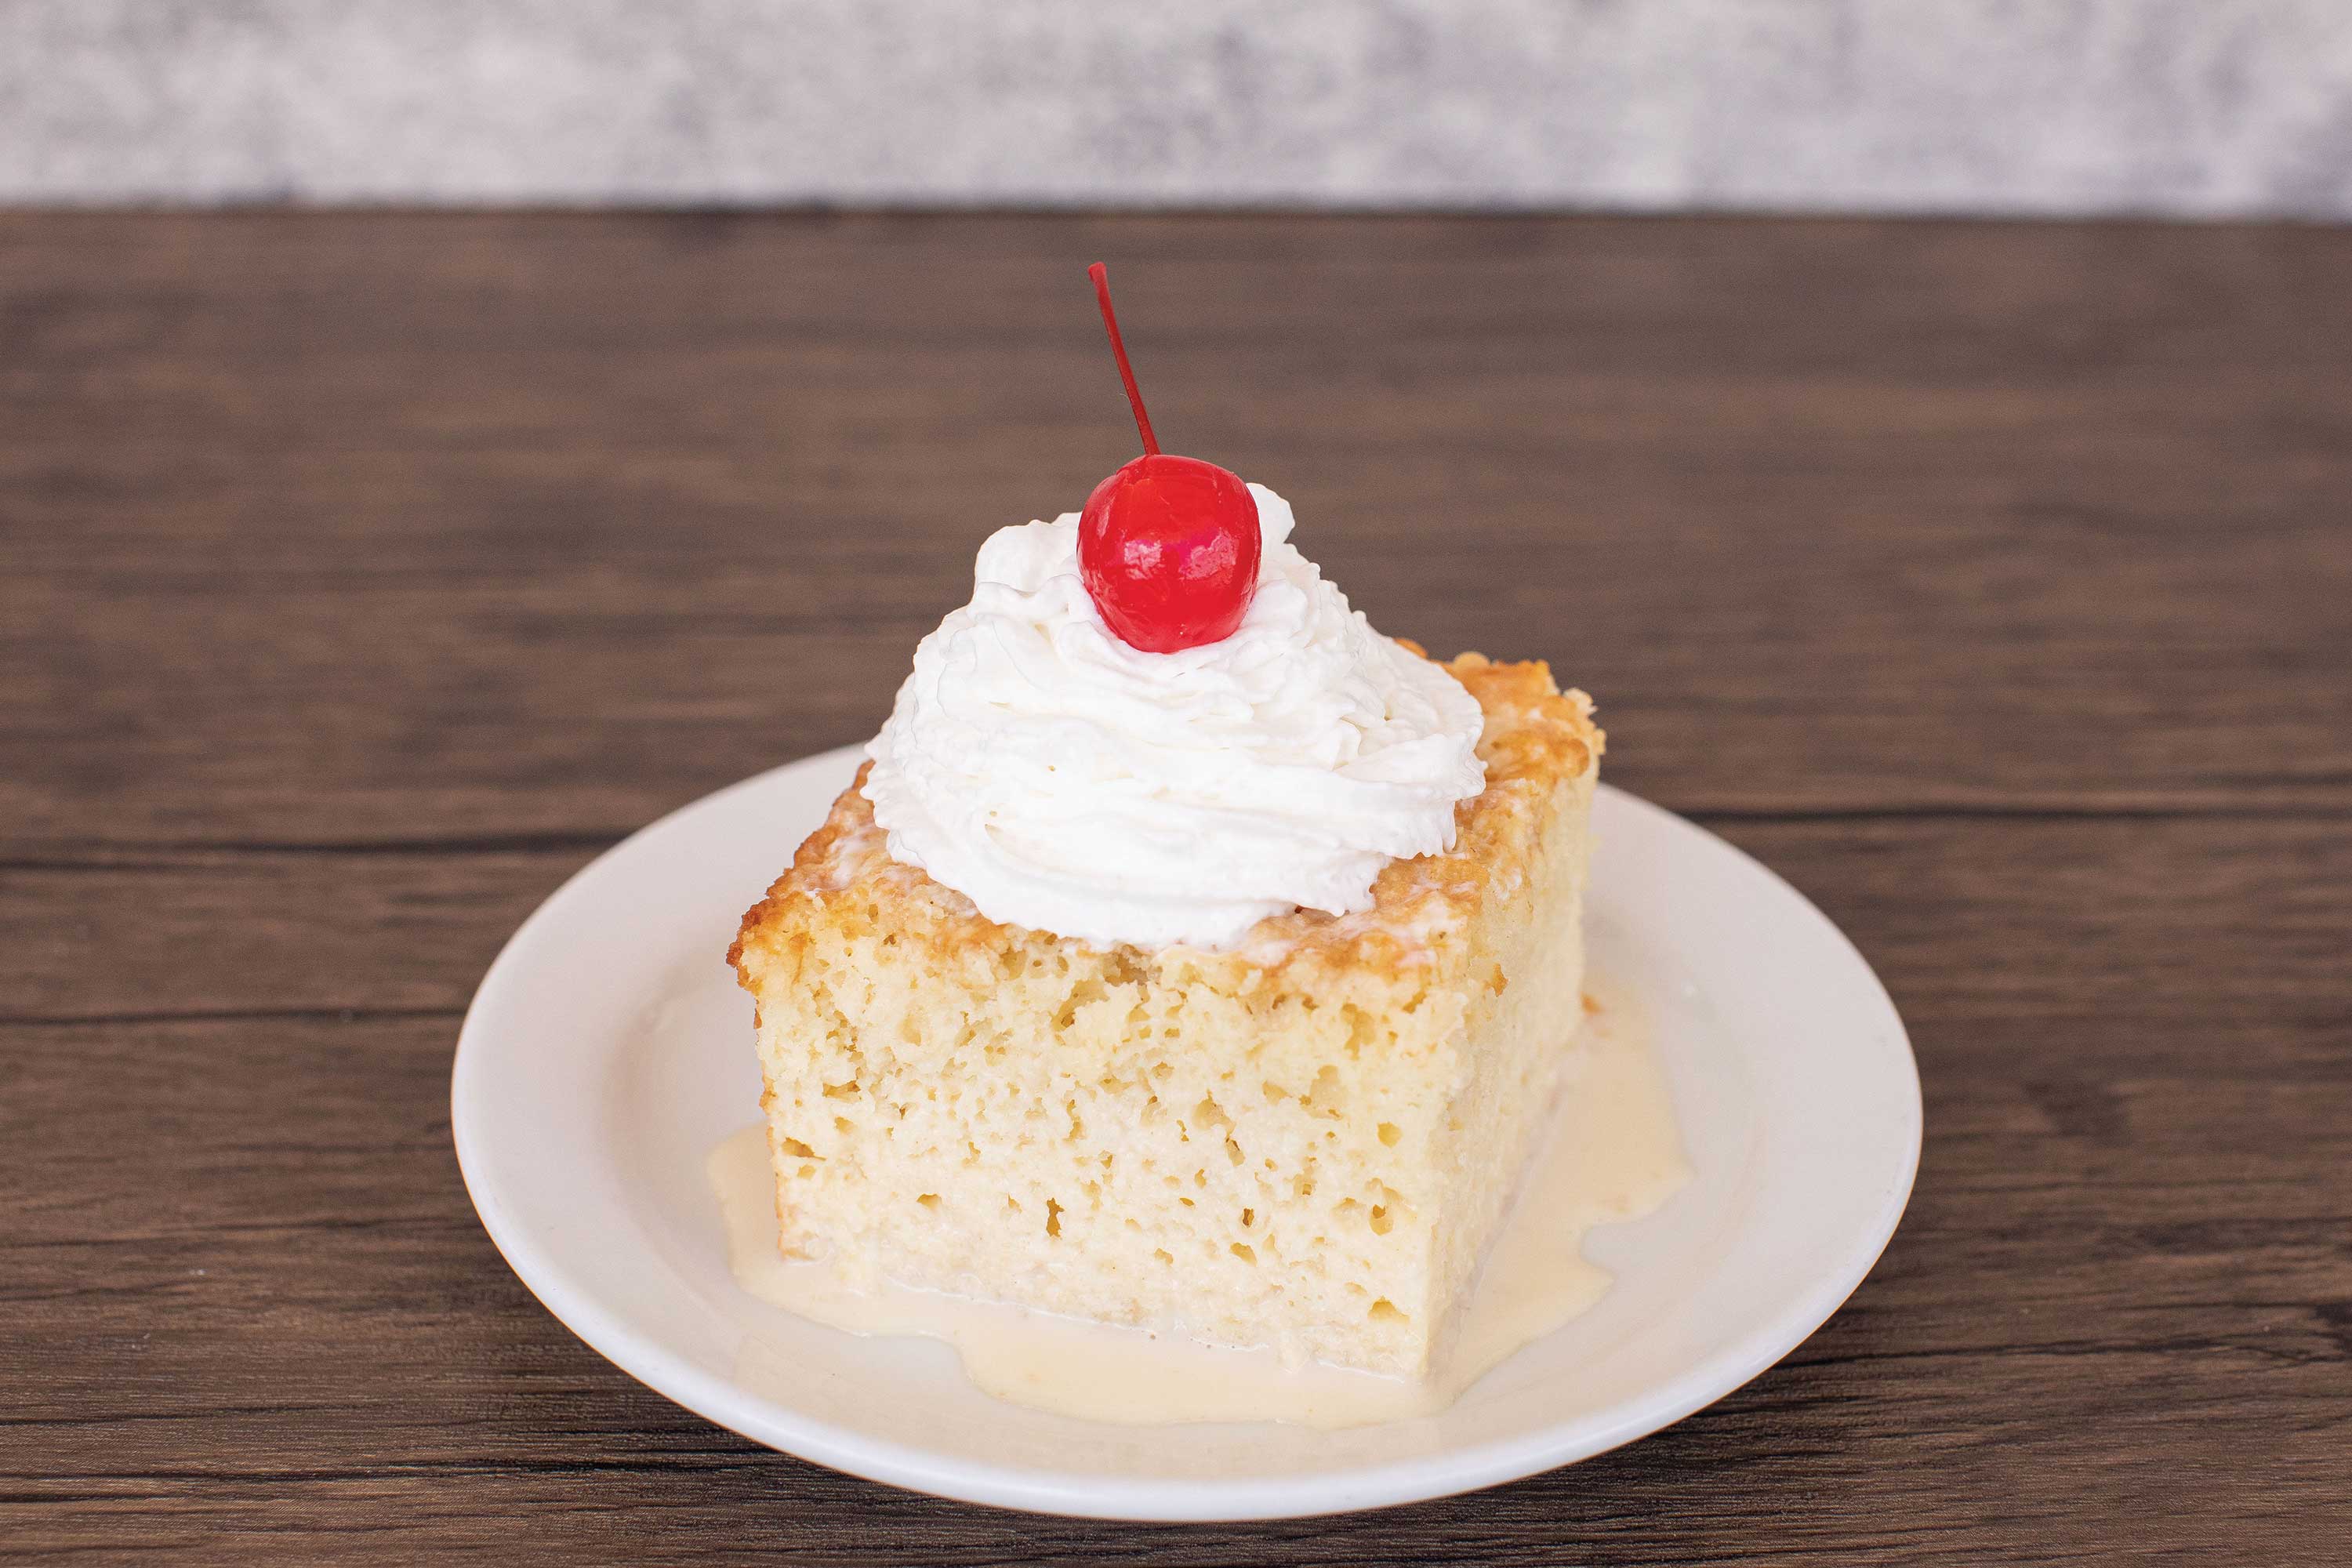 Image: A square slice of cake is set on a white plate. The cake is moist and sits in a small pool of white sauce. Whipped cream and a cherry sits on top of the cake.